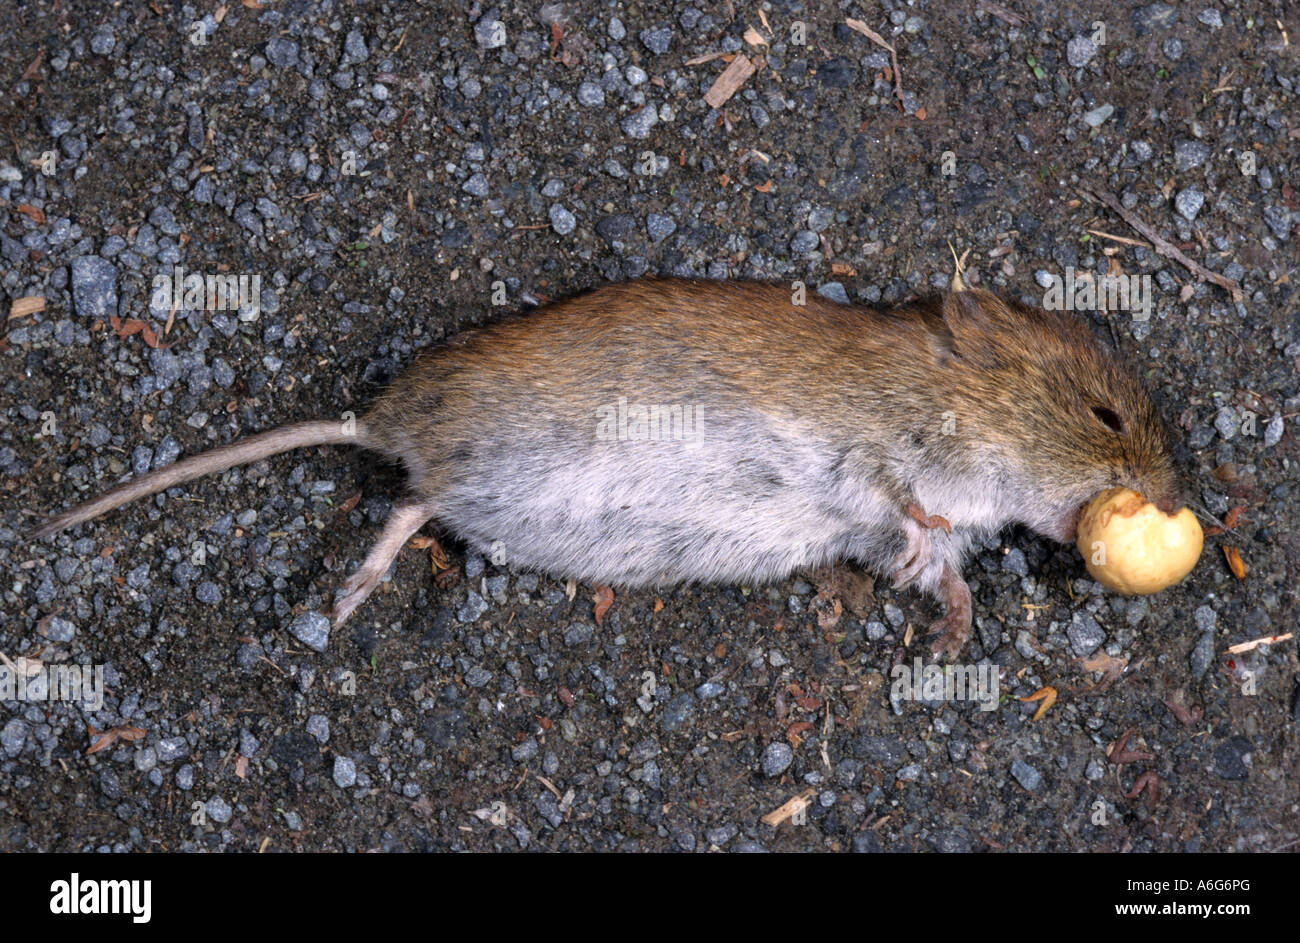 Bank Vole (Clethrionomys glareolus) to run over with Stock Photo